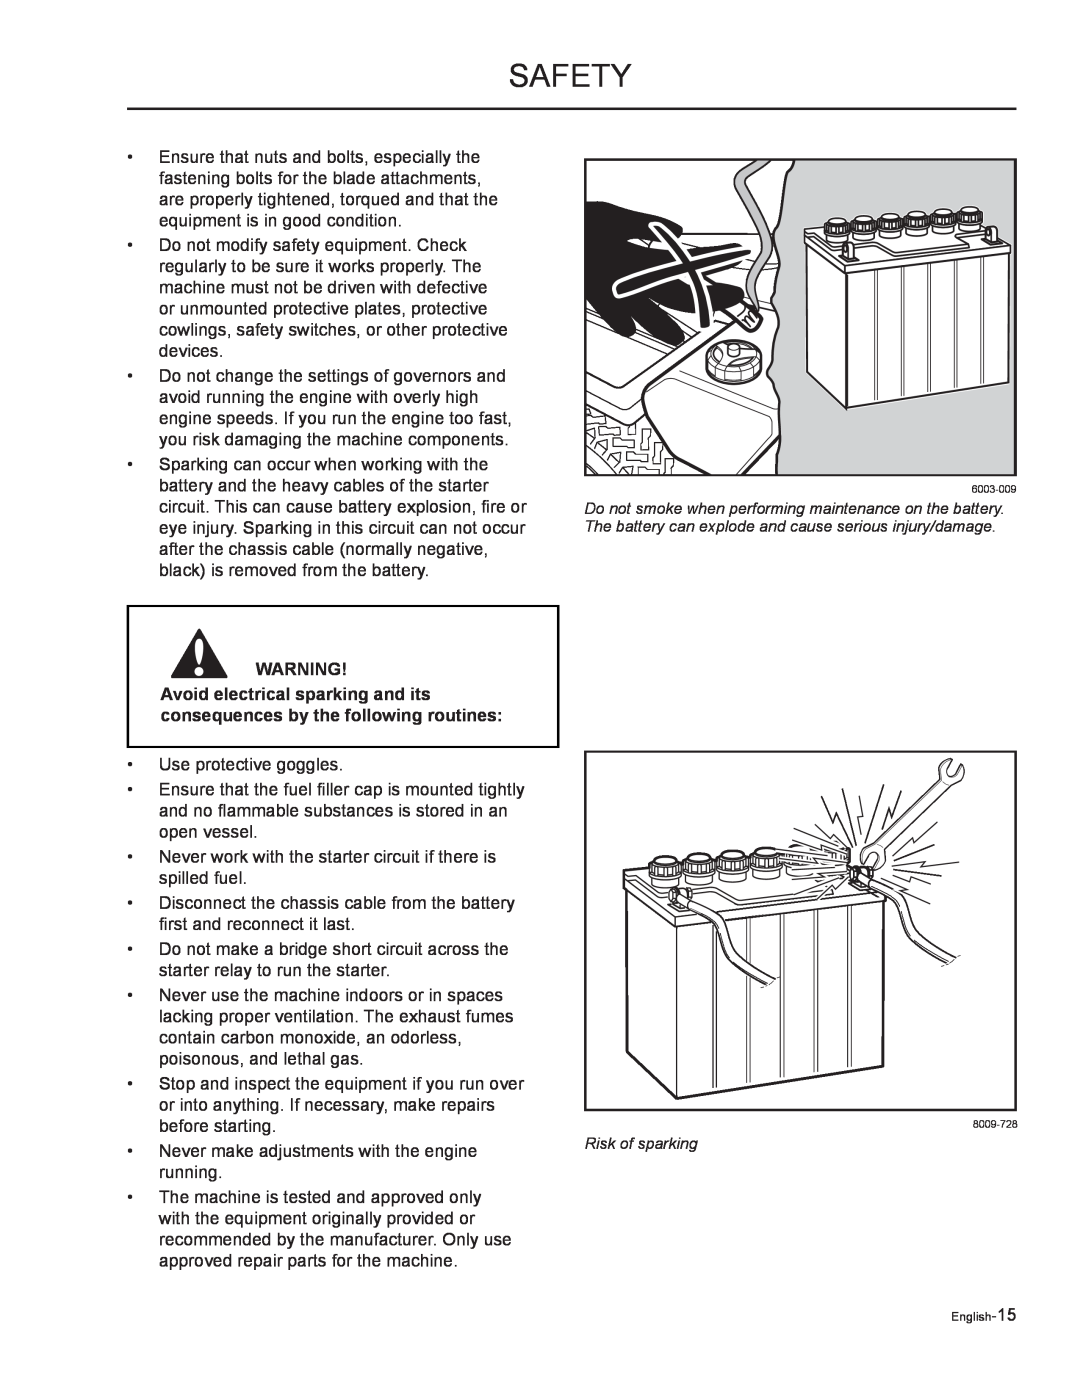 Yazoo/Kees ZMKW52212, ZMKH61252, ZMKW48192, ZMKH52252, ZMKW48172 manual Safety, Risk of sparking, English-15 